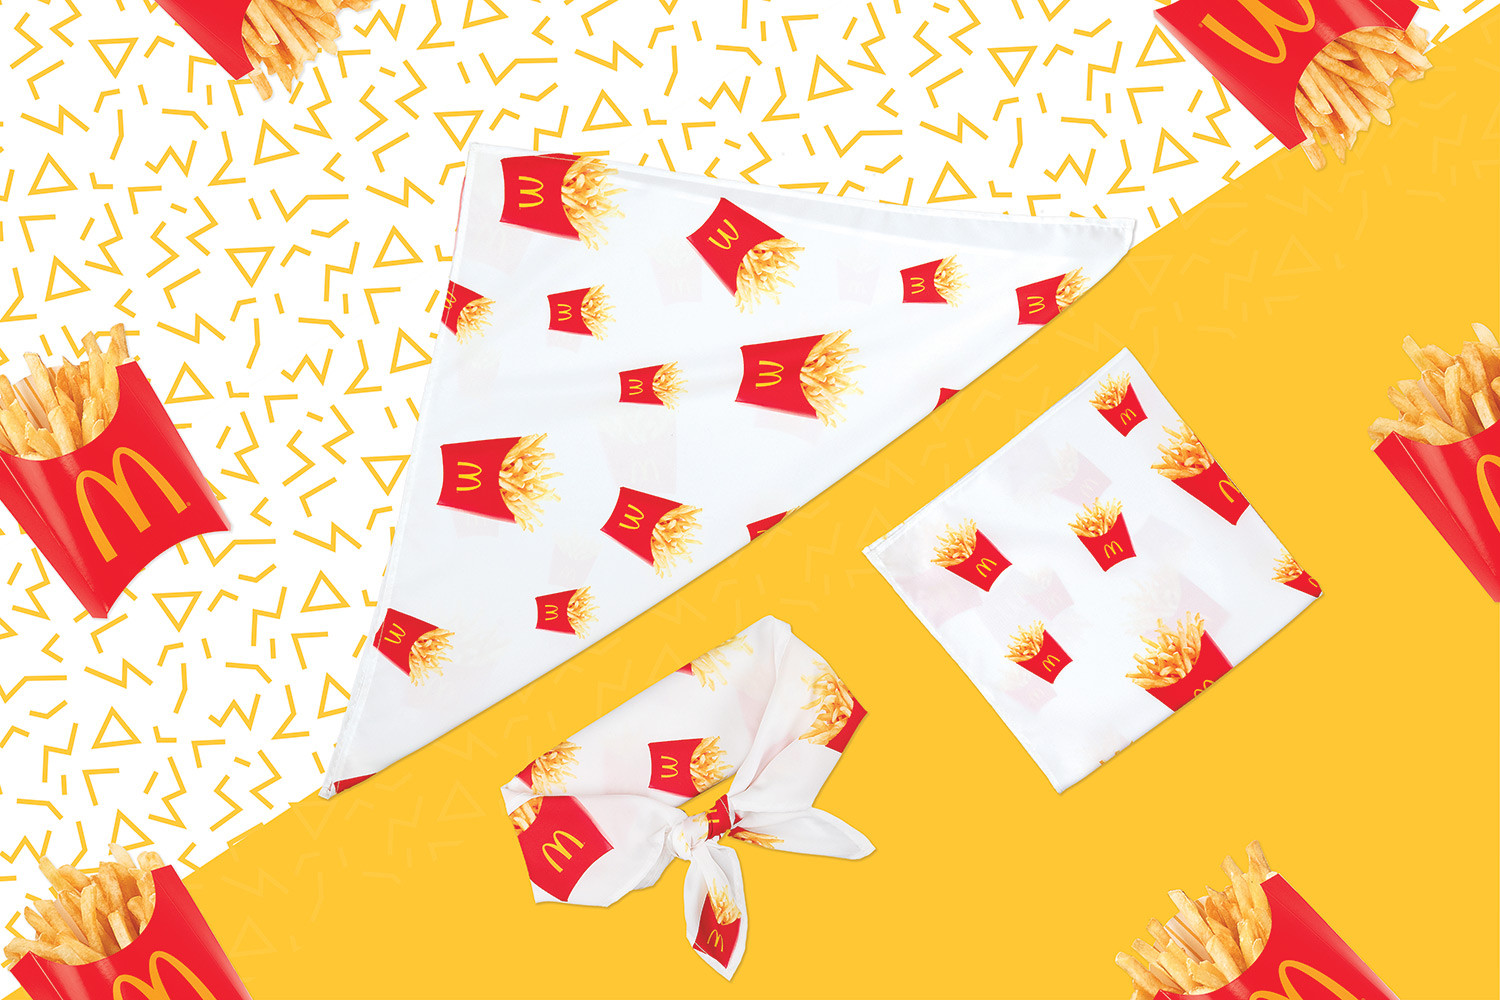 https_%2F%2Fhypebeast.com%2Fimage%2F2018%2F07%2Fmcdonalds-global-mcdelivery-day-collection-2.jpg